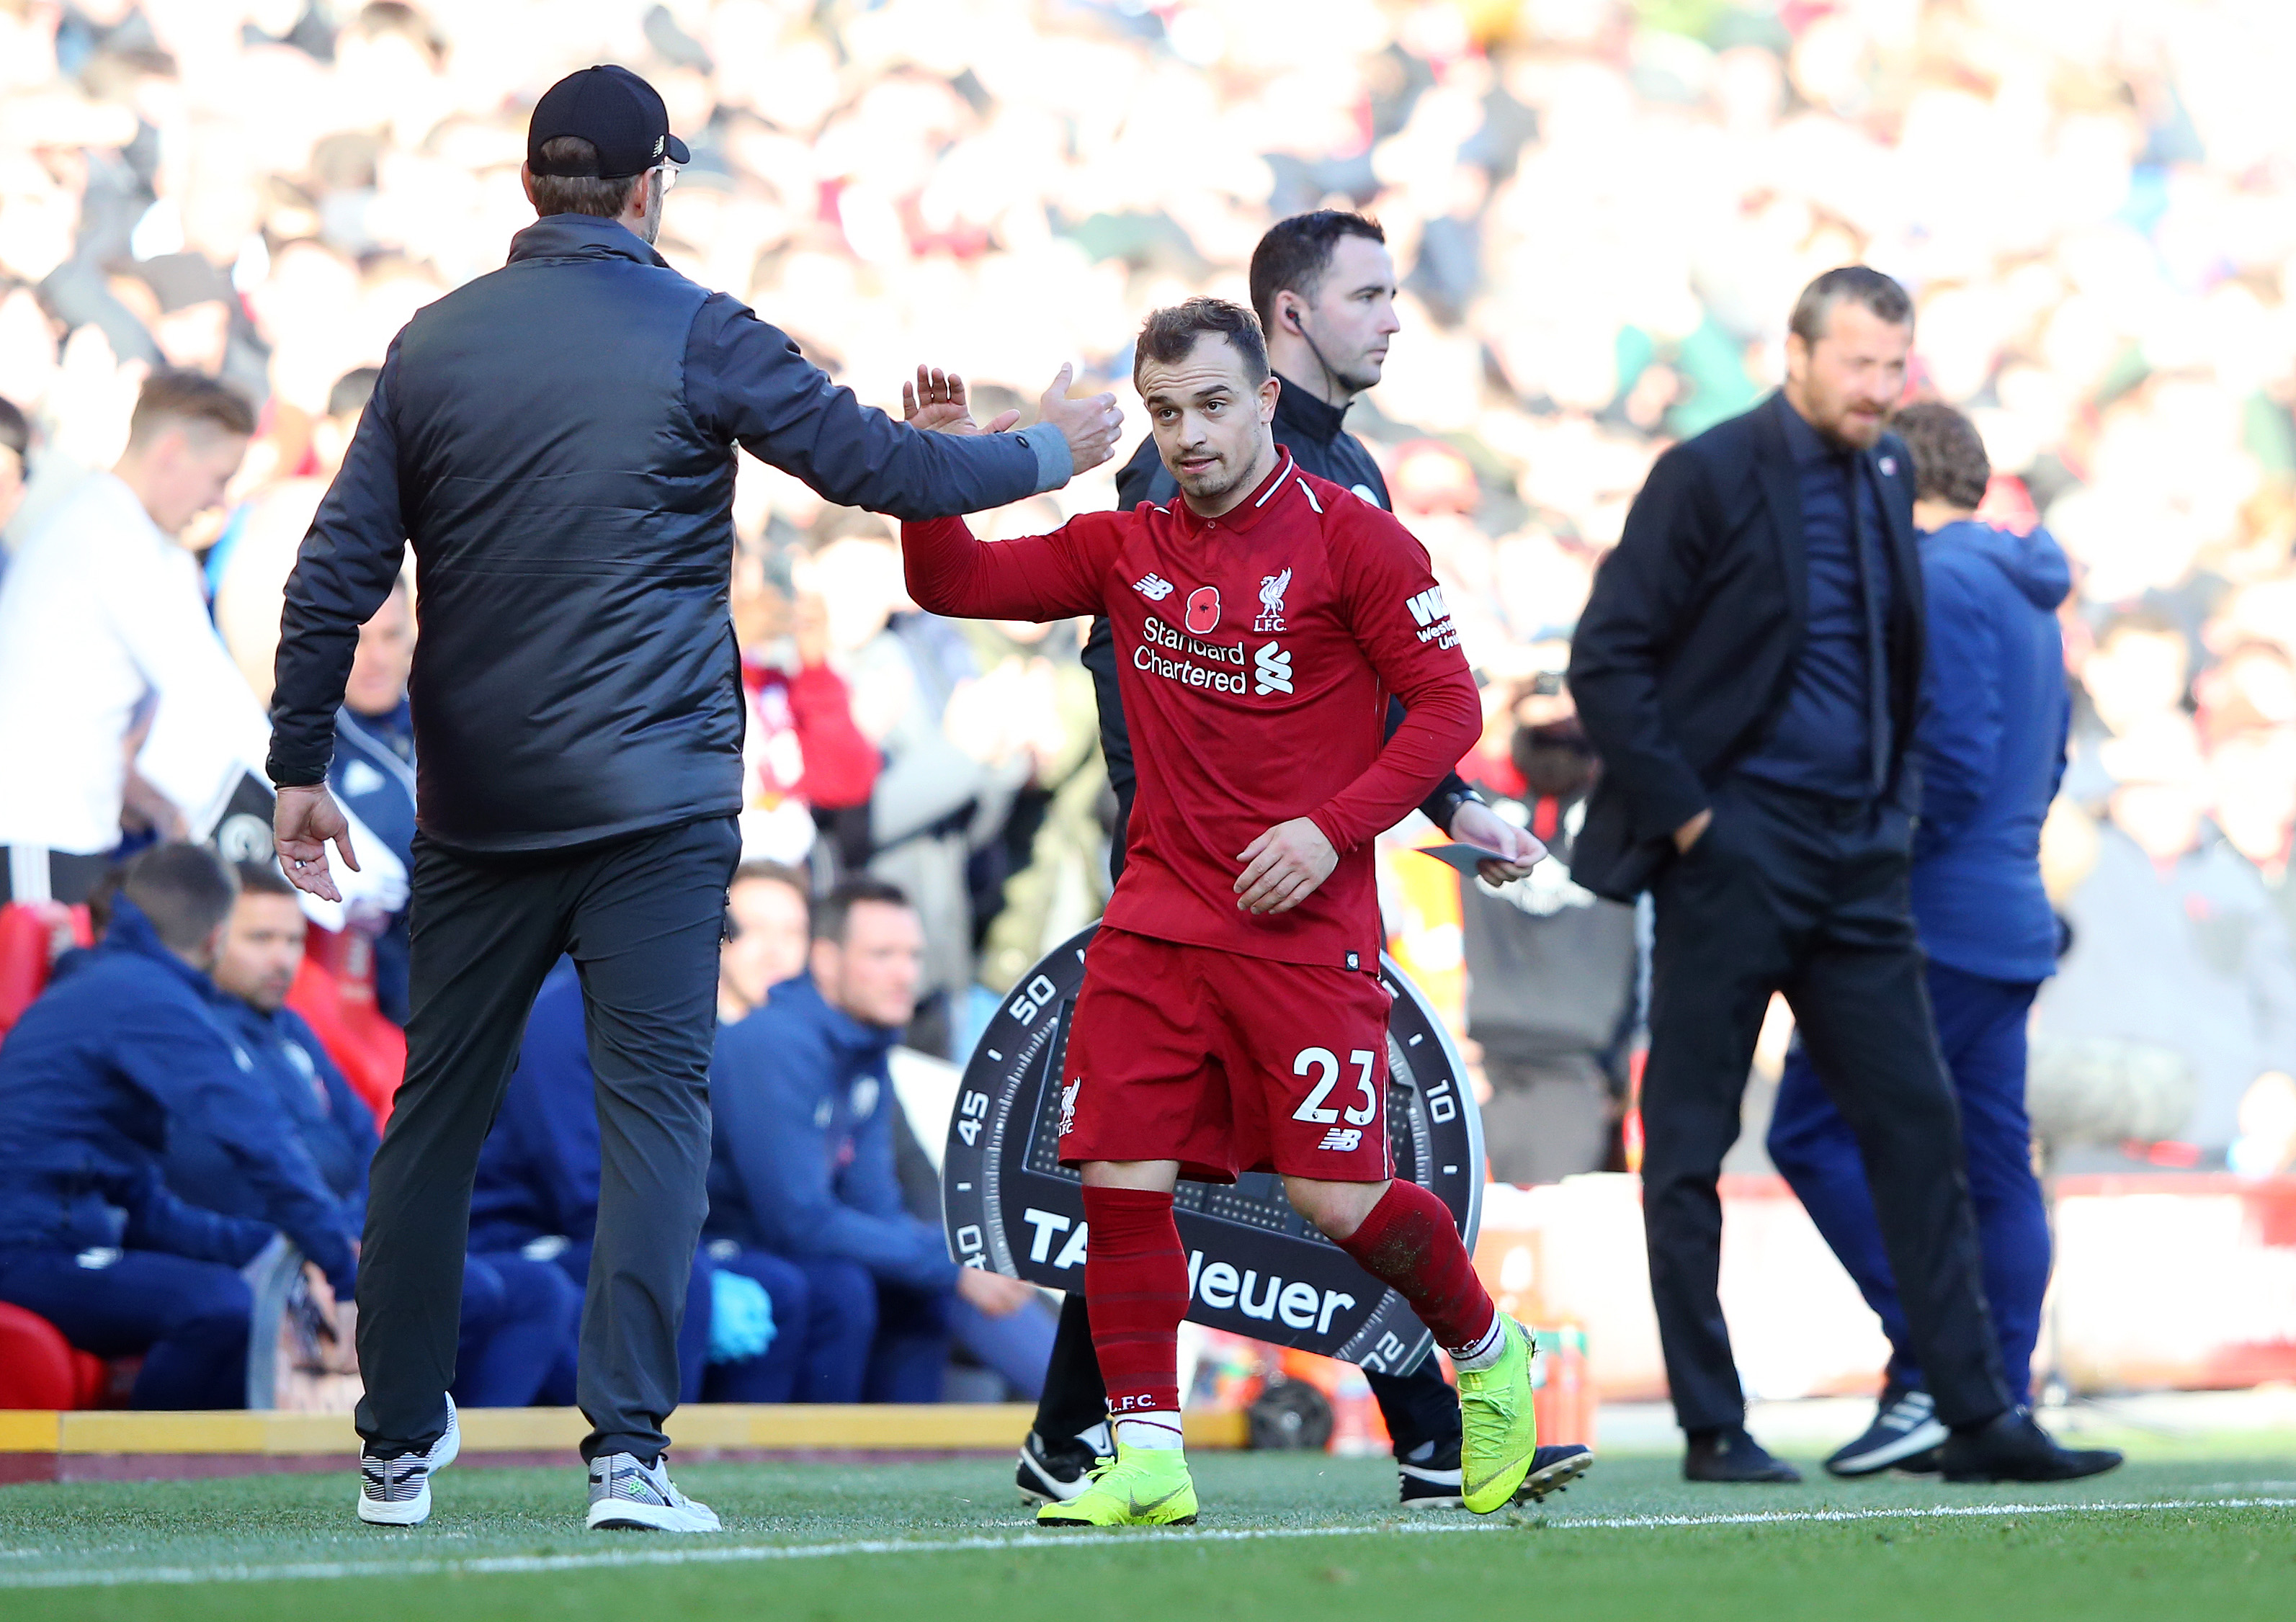 LIVERPOOL, ENGLAND - NOVEMBER 11:  Xherdan Shaqiri of Liverpool is congratulated by Jurgen Klopp, Manager of Liverpool as he is substituted during the Premier League match between Liverpool FC and Fulham FC at Anfield on November 11, 2018 in Liverpool, United Kingdom.  (Photo by Alex Livesey/Getty Images)